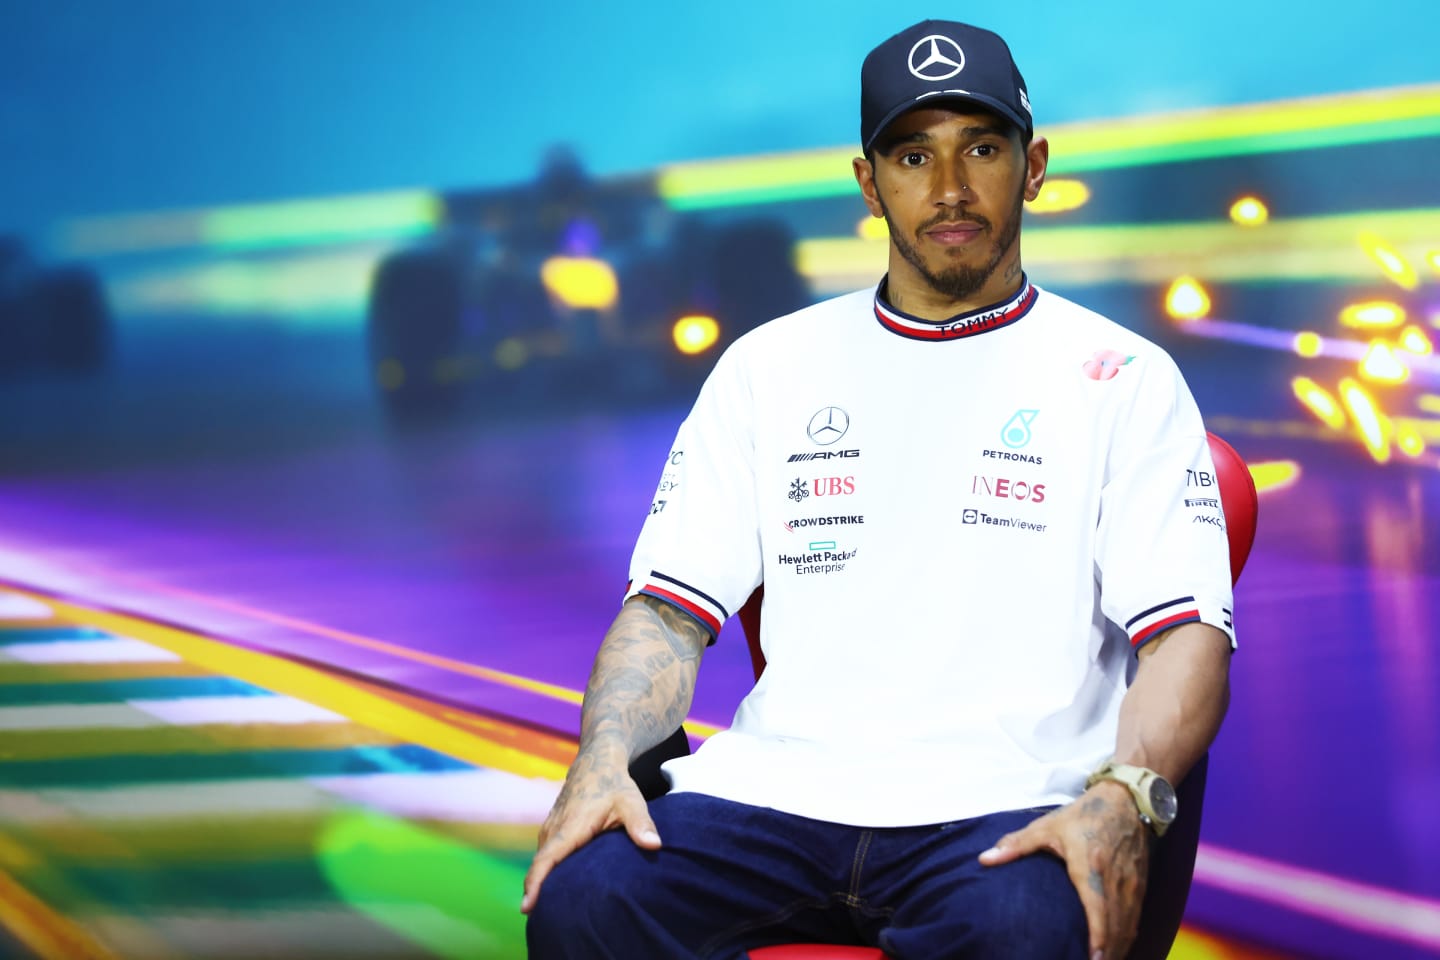 SAO PAULO, BRAZIL - NOVEMBER 13: Second placed Lewis Hamilton of Great Britain and Mercedes attends the press conference after the F1 Grand Prix of Brazil at Autodromo Jose Carlos Pace on November 13, 2022 in Sao Paulo, Brazil. (Photo by Dan Istitene/Getty Images)